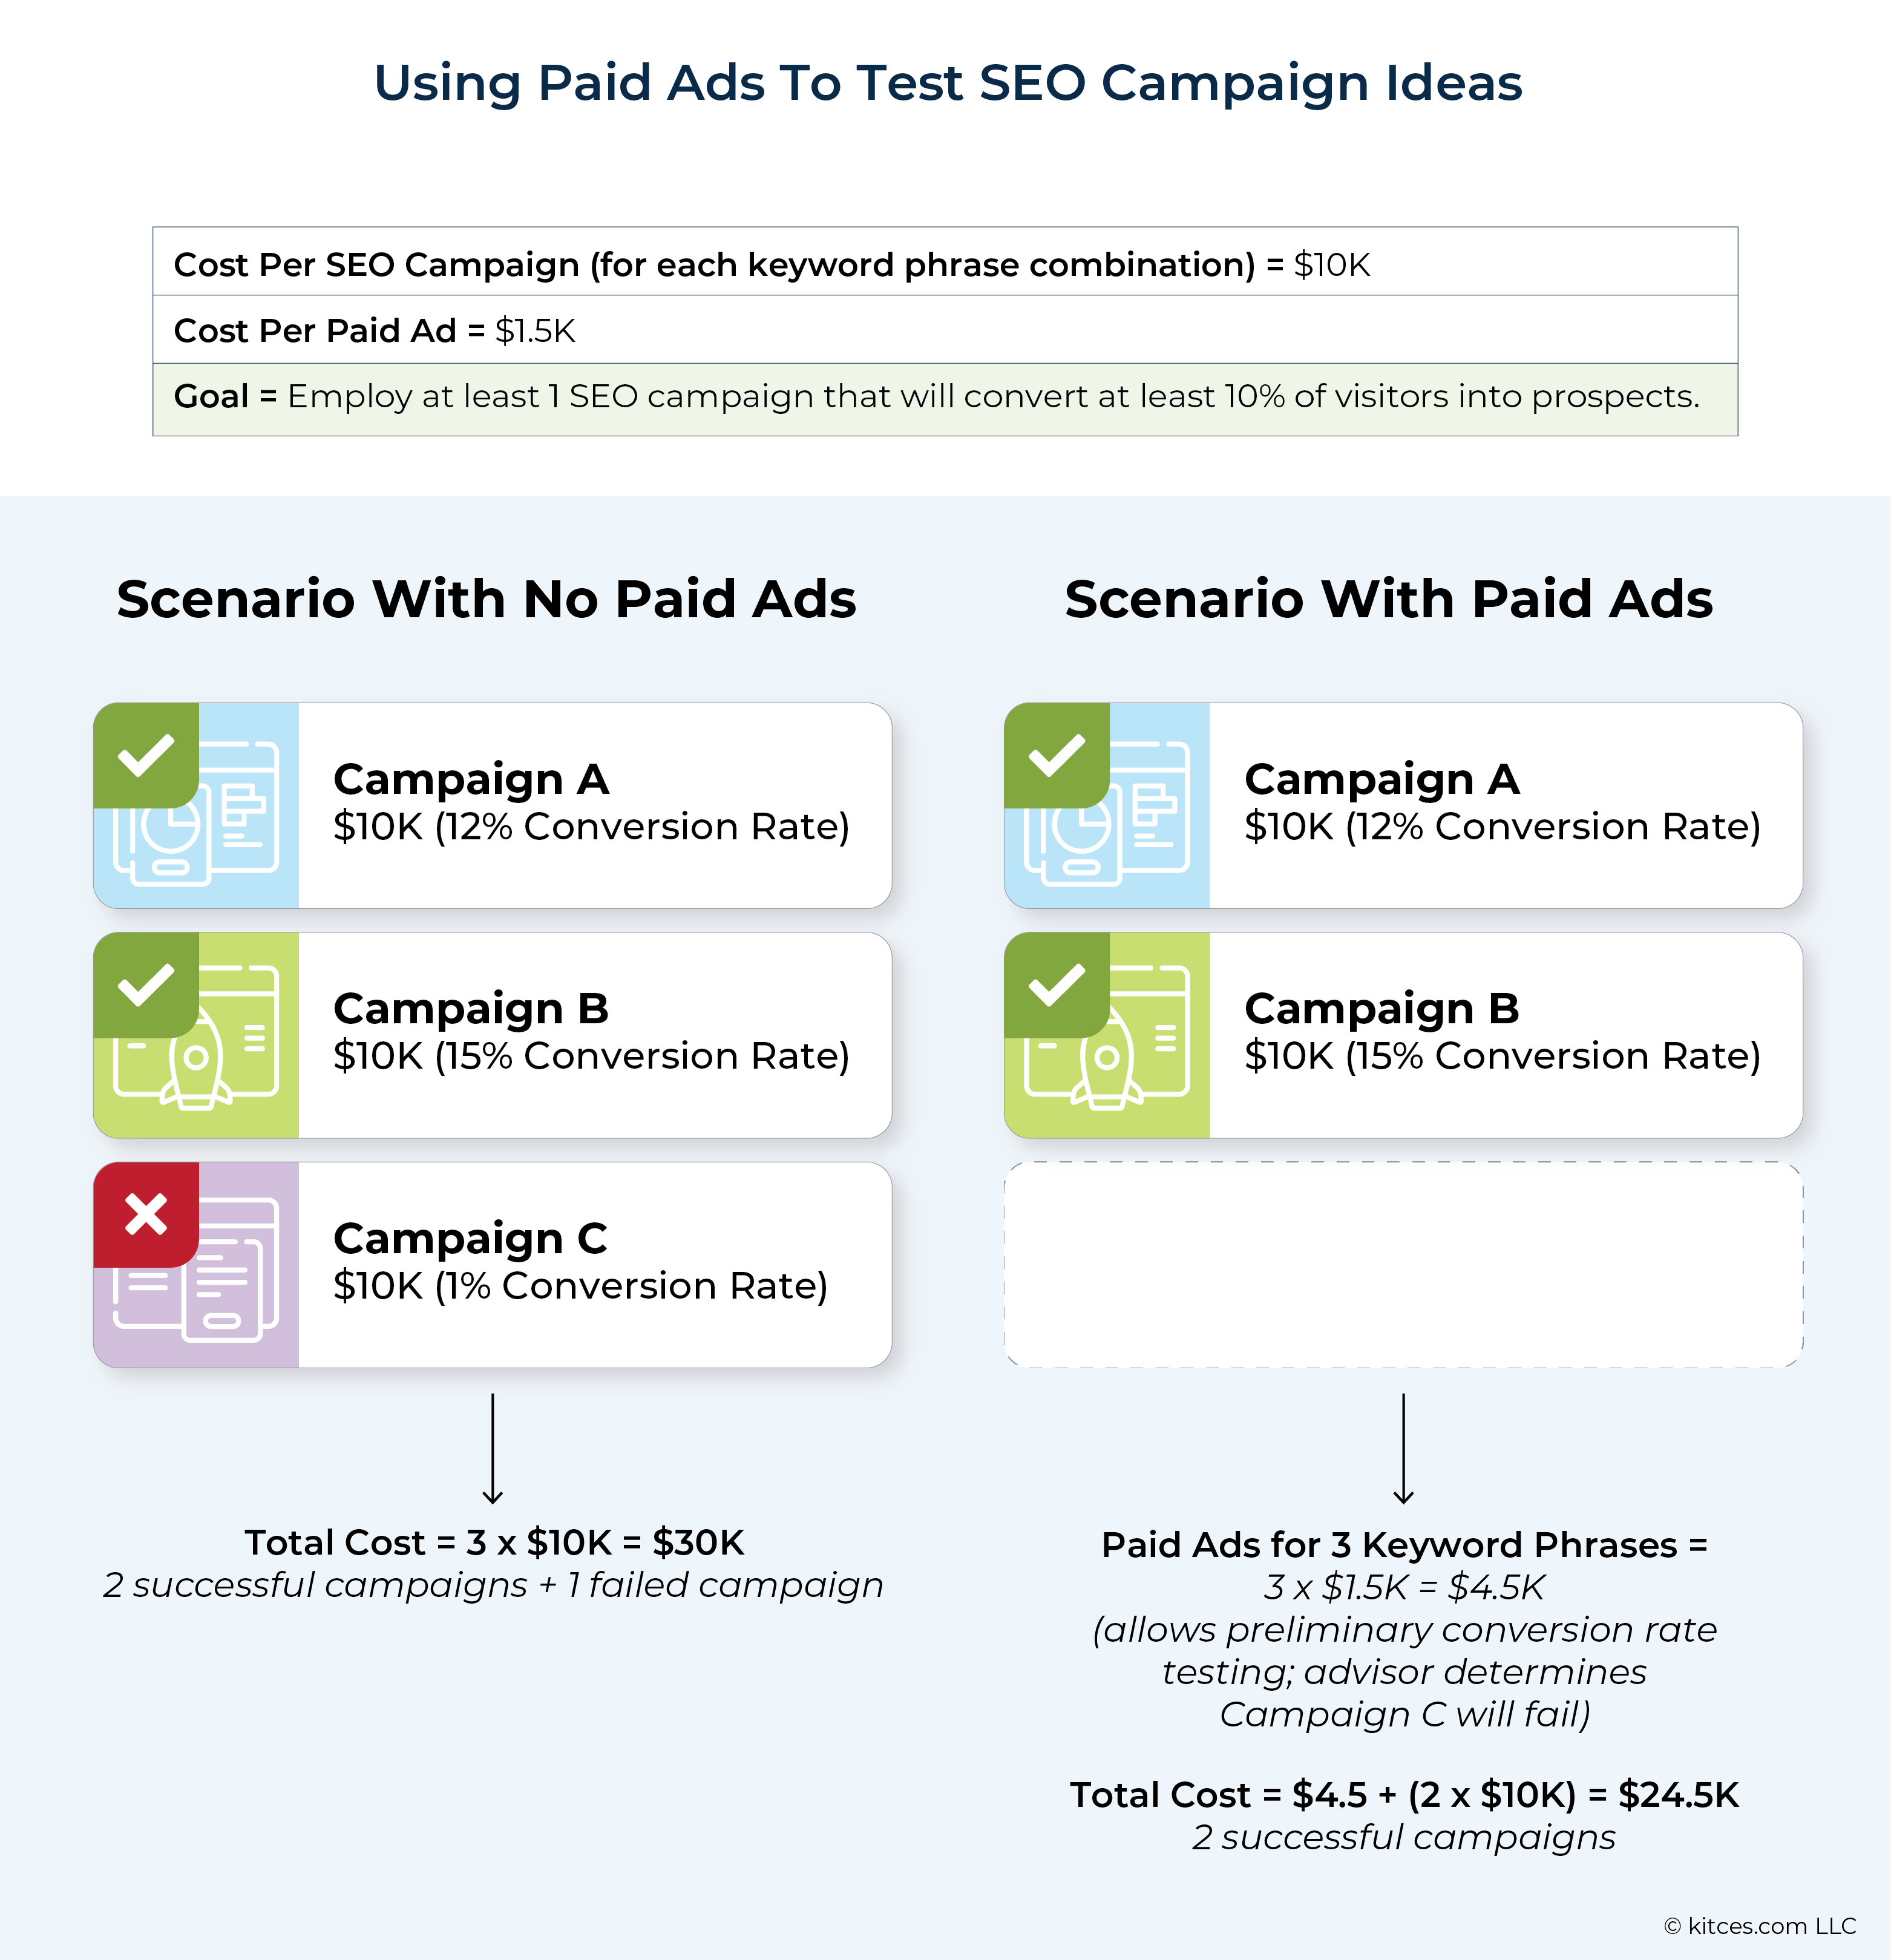 Using Paid Ads To Test SEO Campaign Ideas